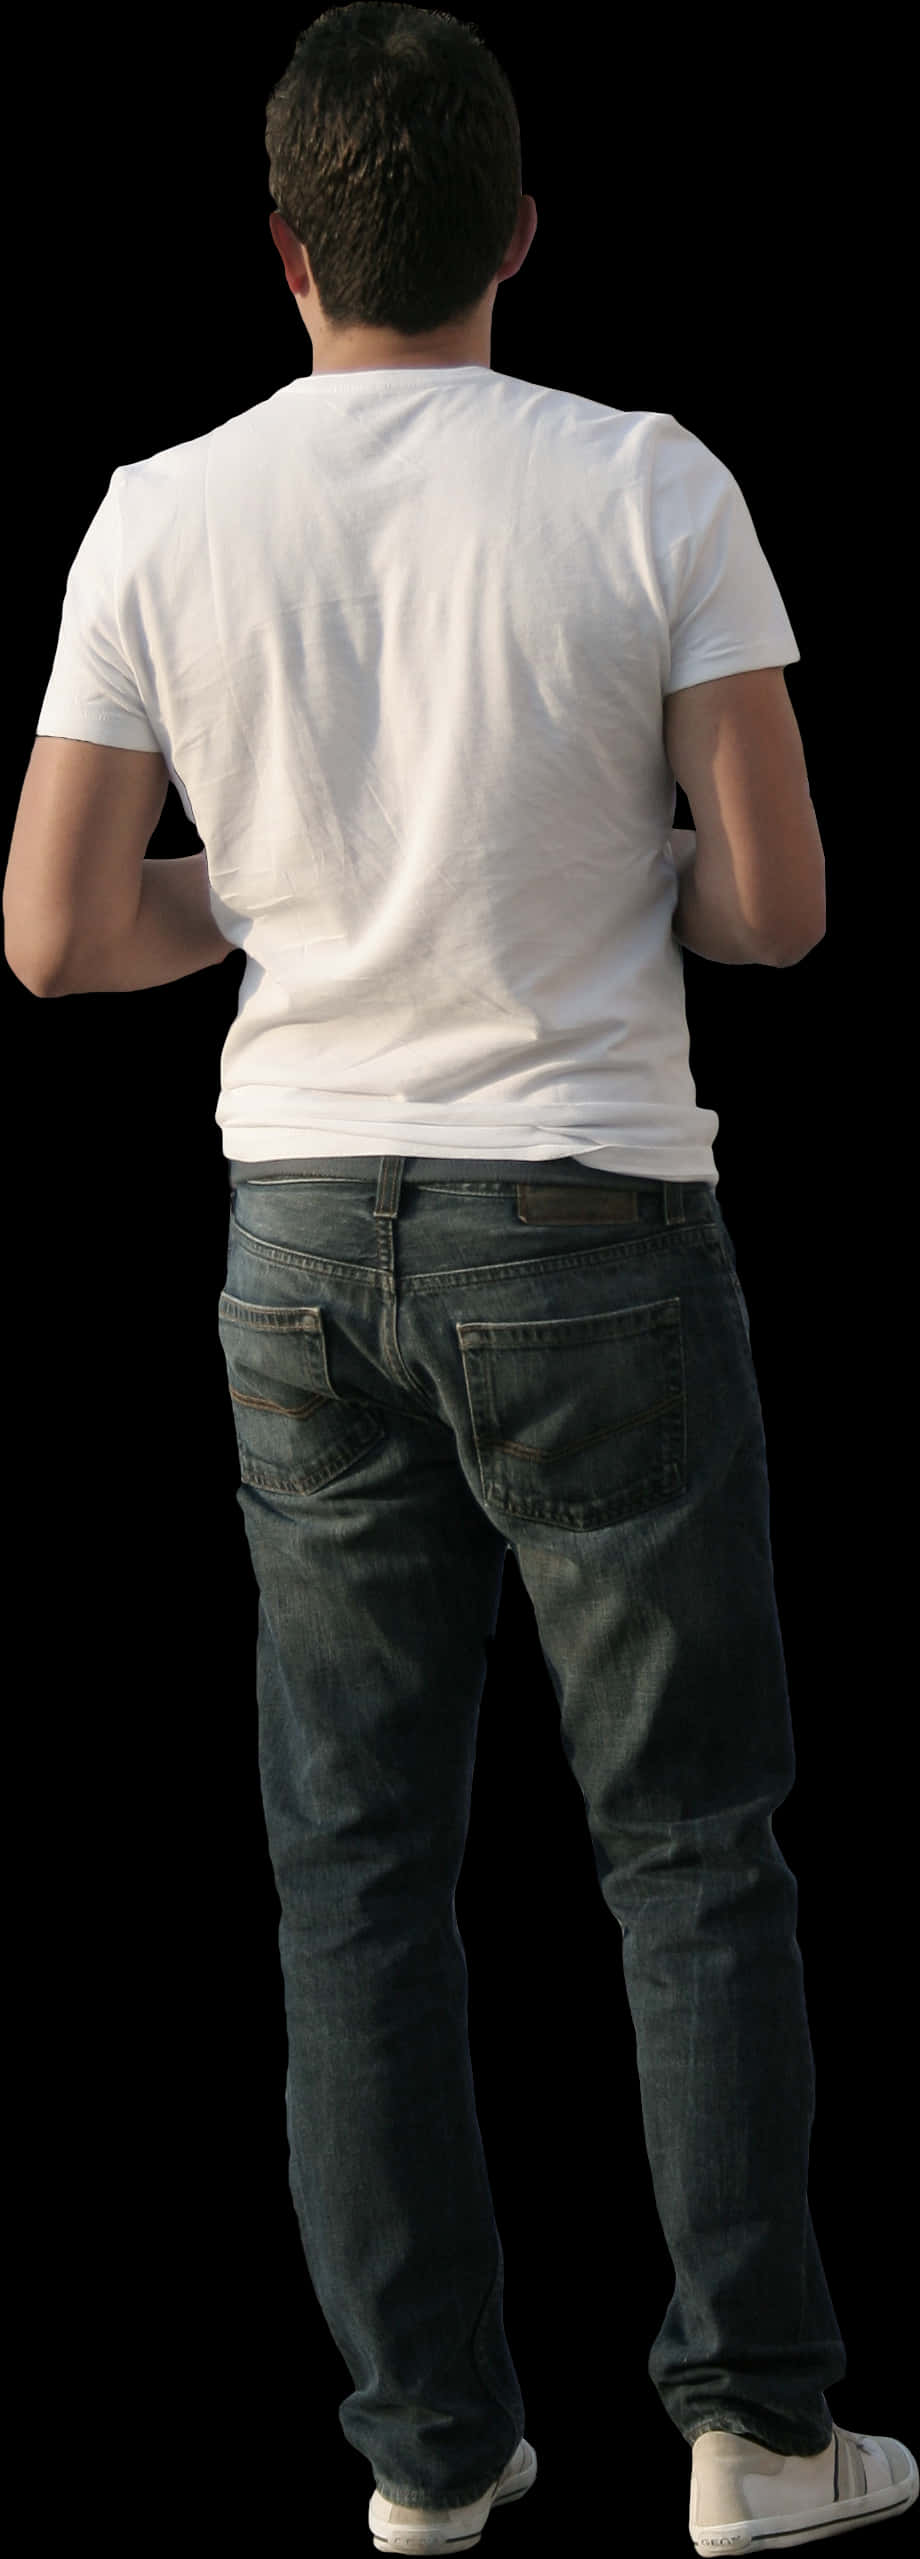 Manin White Shirtand Jeans Back View PNG